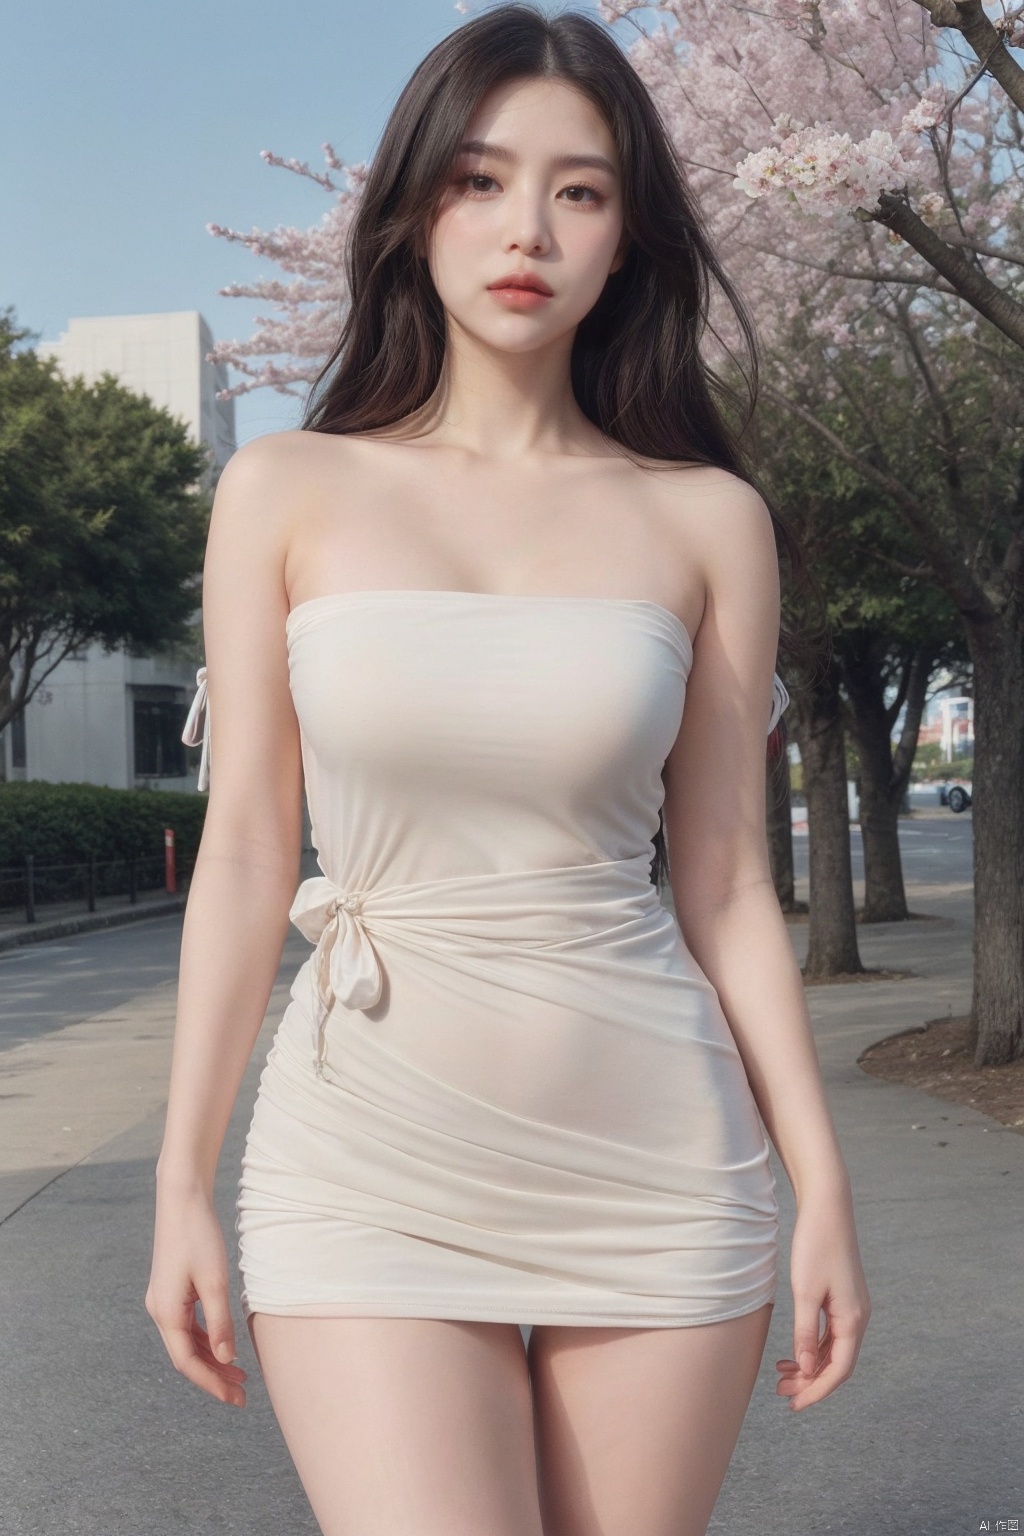  1 girl, delicate fingers, shiny skin,Exquisite face,Arrogant Twin Peaks,,Dress,Bare shoulder,Bow tie, narrow waist,Charming legs,Beautiful sky,The beautiful cherry grove,Cherry blossom,,Focus on characters, dress